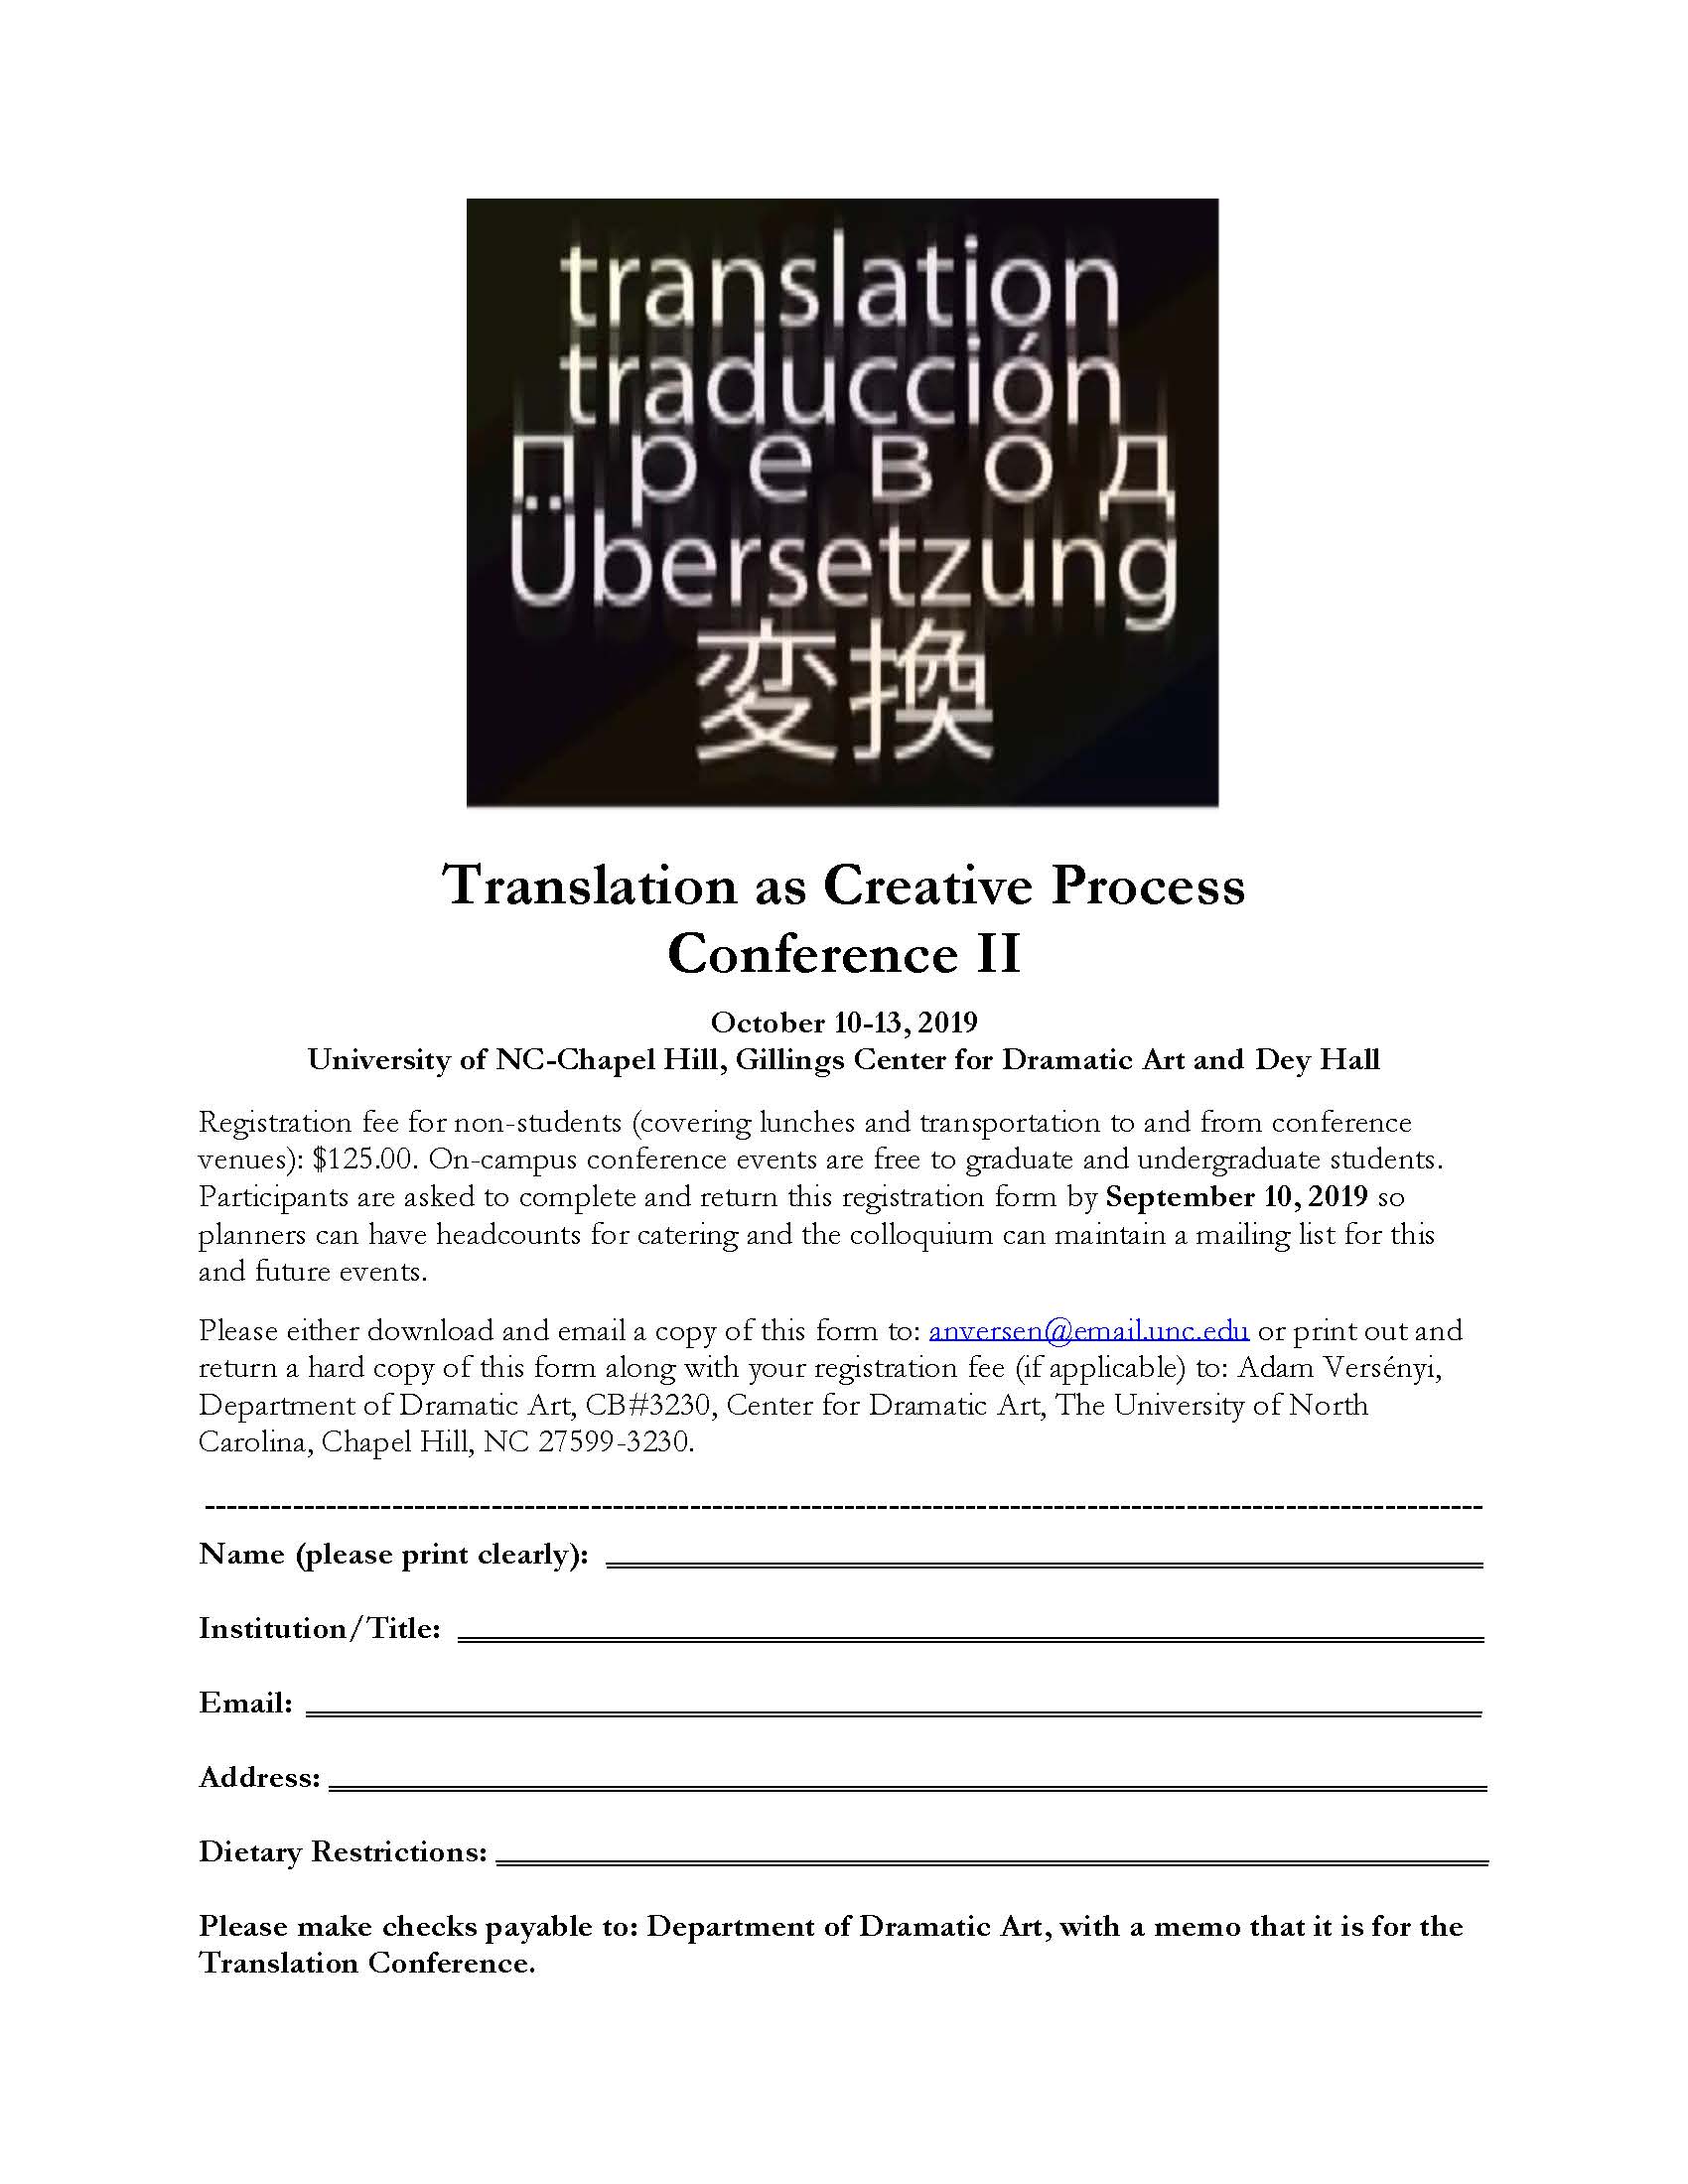 Theatrical Translation as Creative Process: A conference Festival II